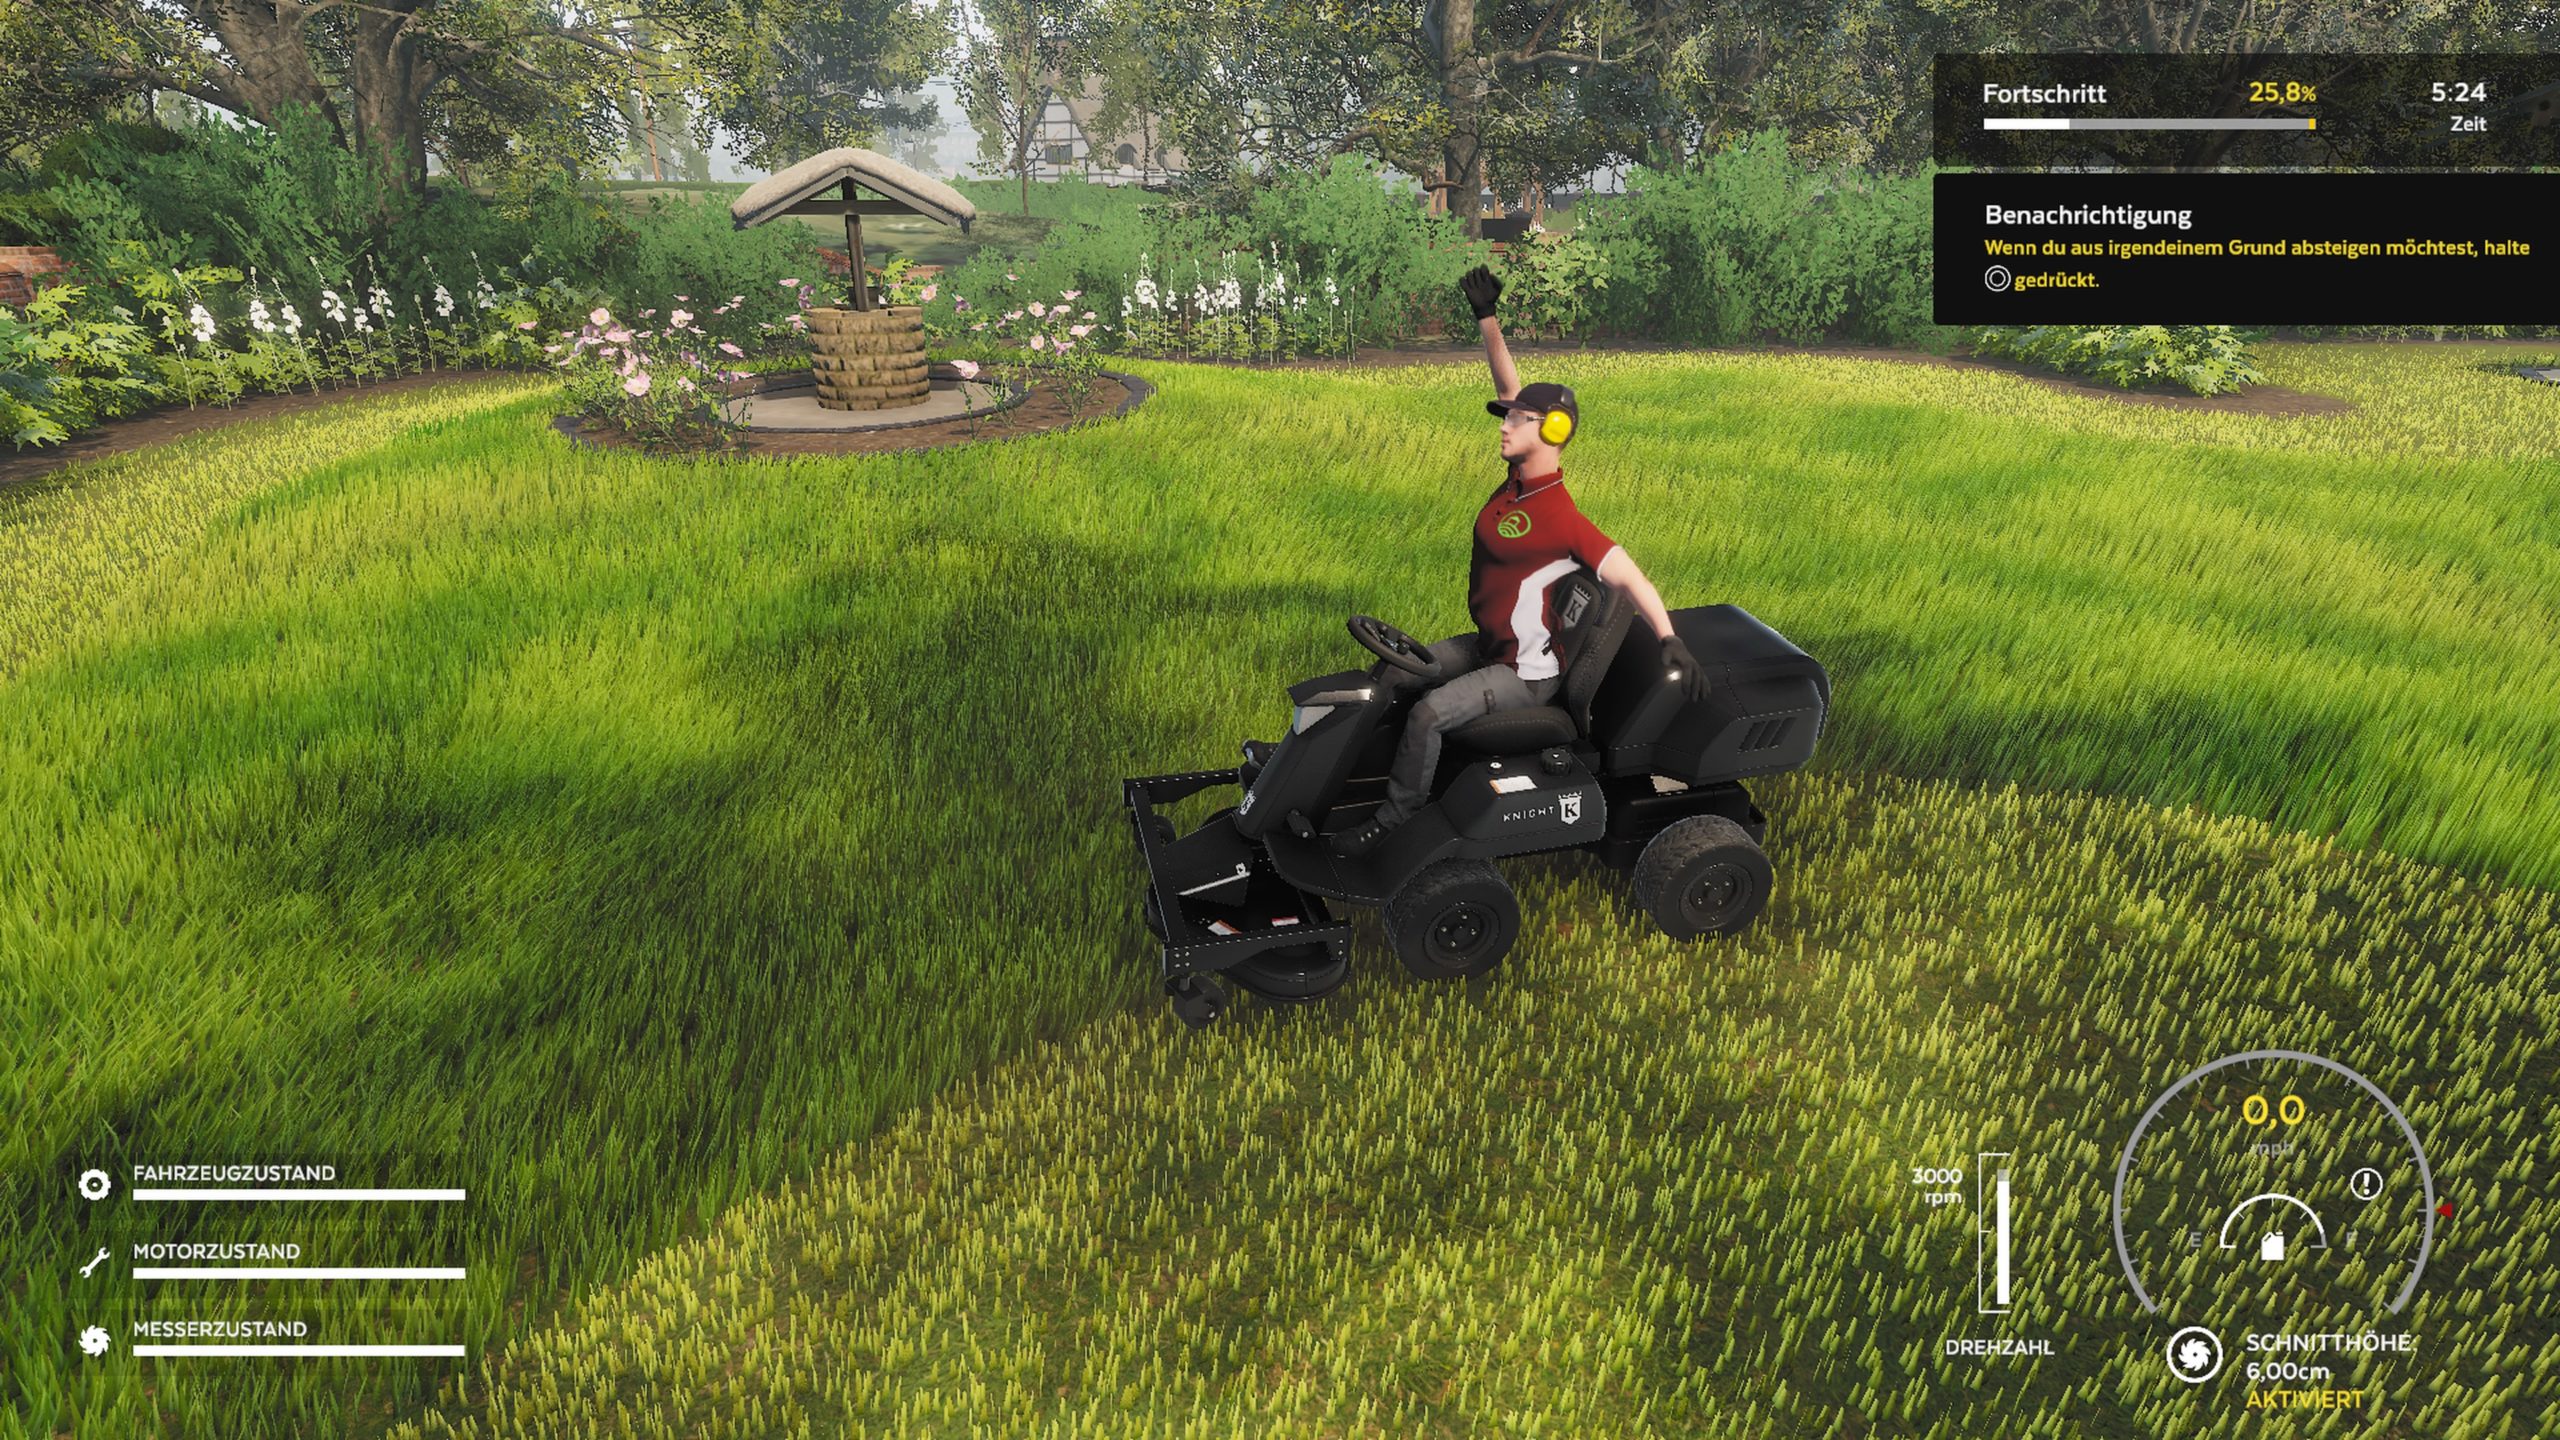 Lawn Mowing Simulator 20220407173204 scaled 1 Lawn Mowing Simulator - Die PlayStation 5 Version bei uns im Test